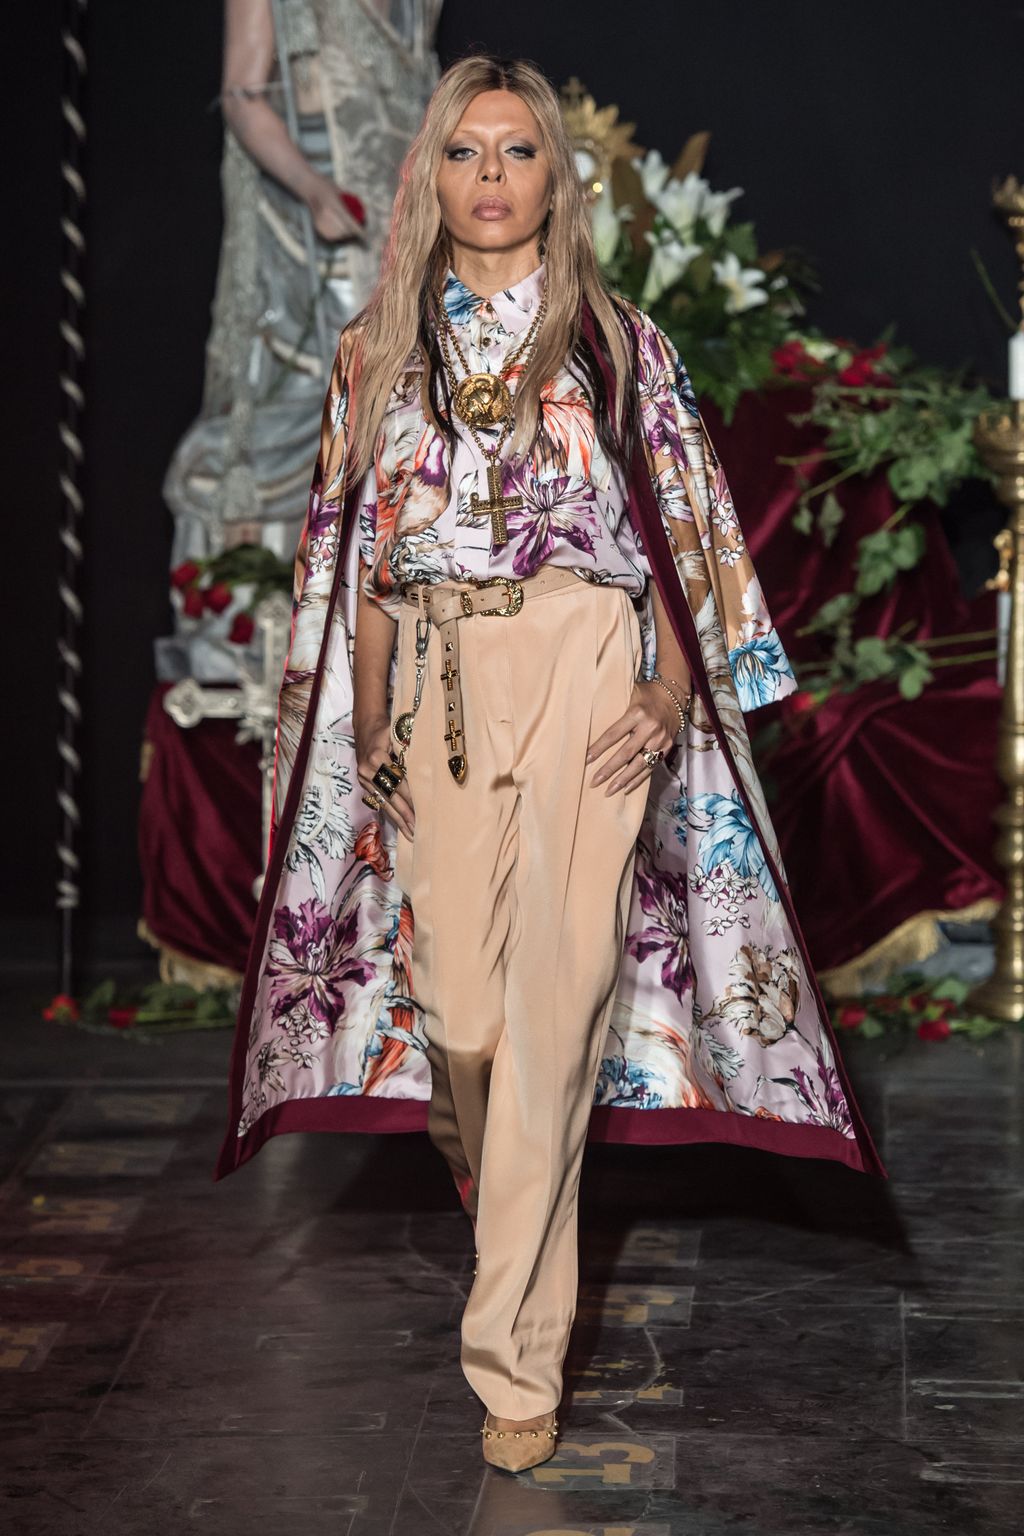 Etro, Sportmax and Versace SS17 show reports: Milan Fashion Week